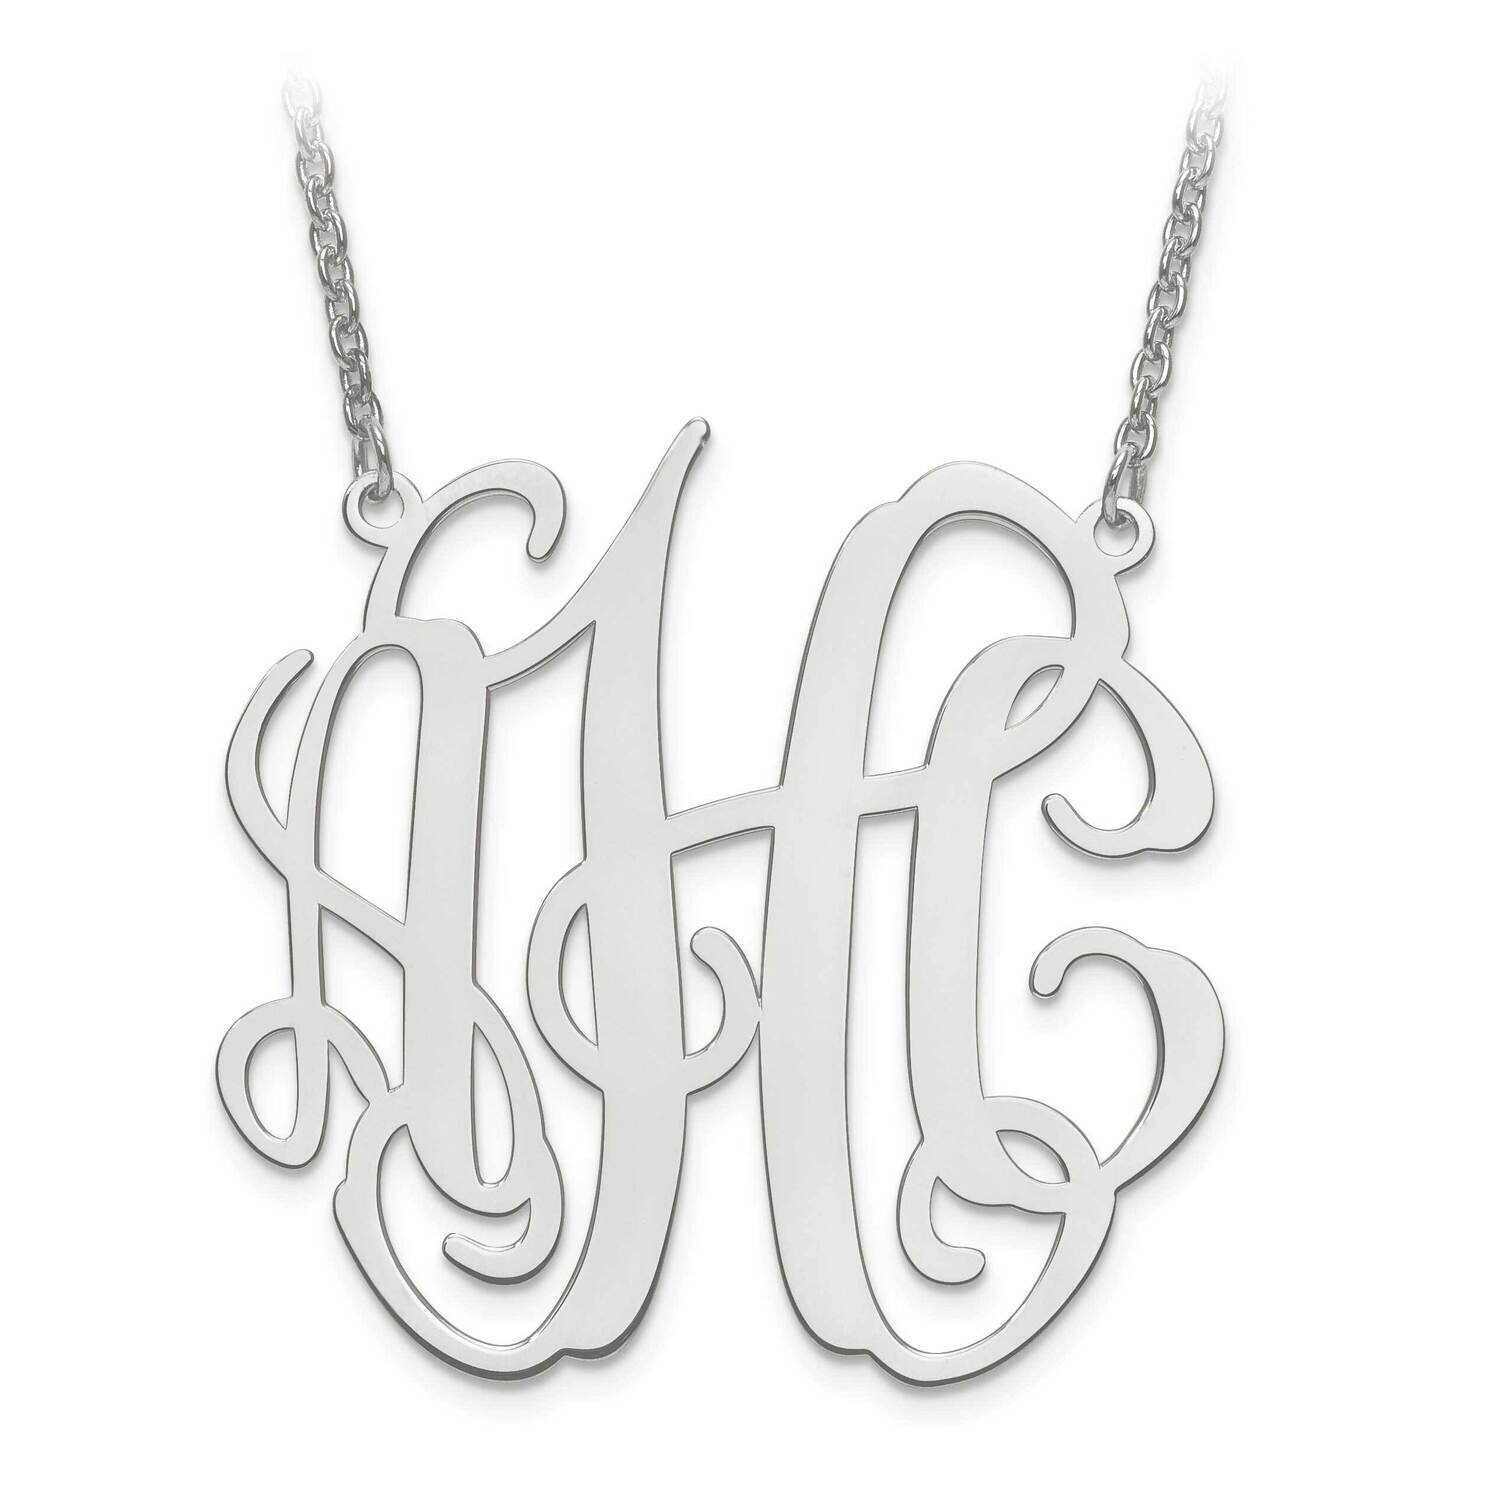 L Laser Polished Circular Shaped Monogram Plate with Chain 14k White Gold XNA549W